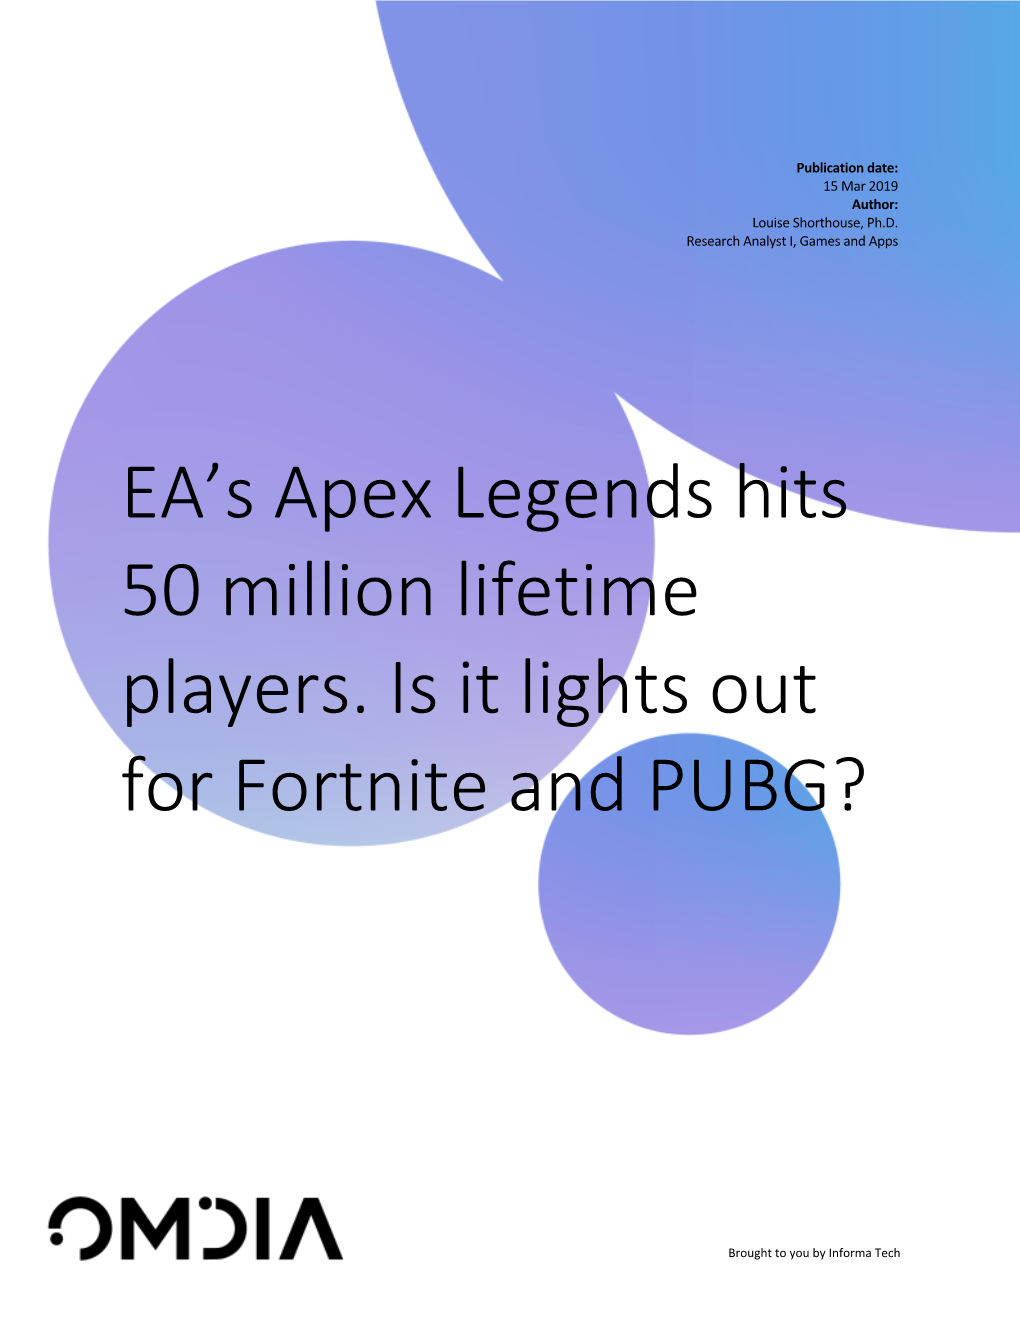 EA's Apex Legends Hits 50 Million Lifetime Players. Is It Lights out for Fortnite and PUBG?